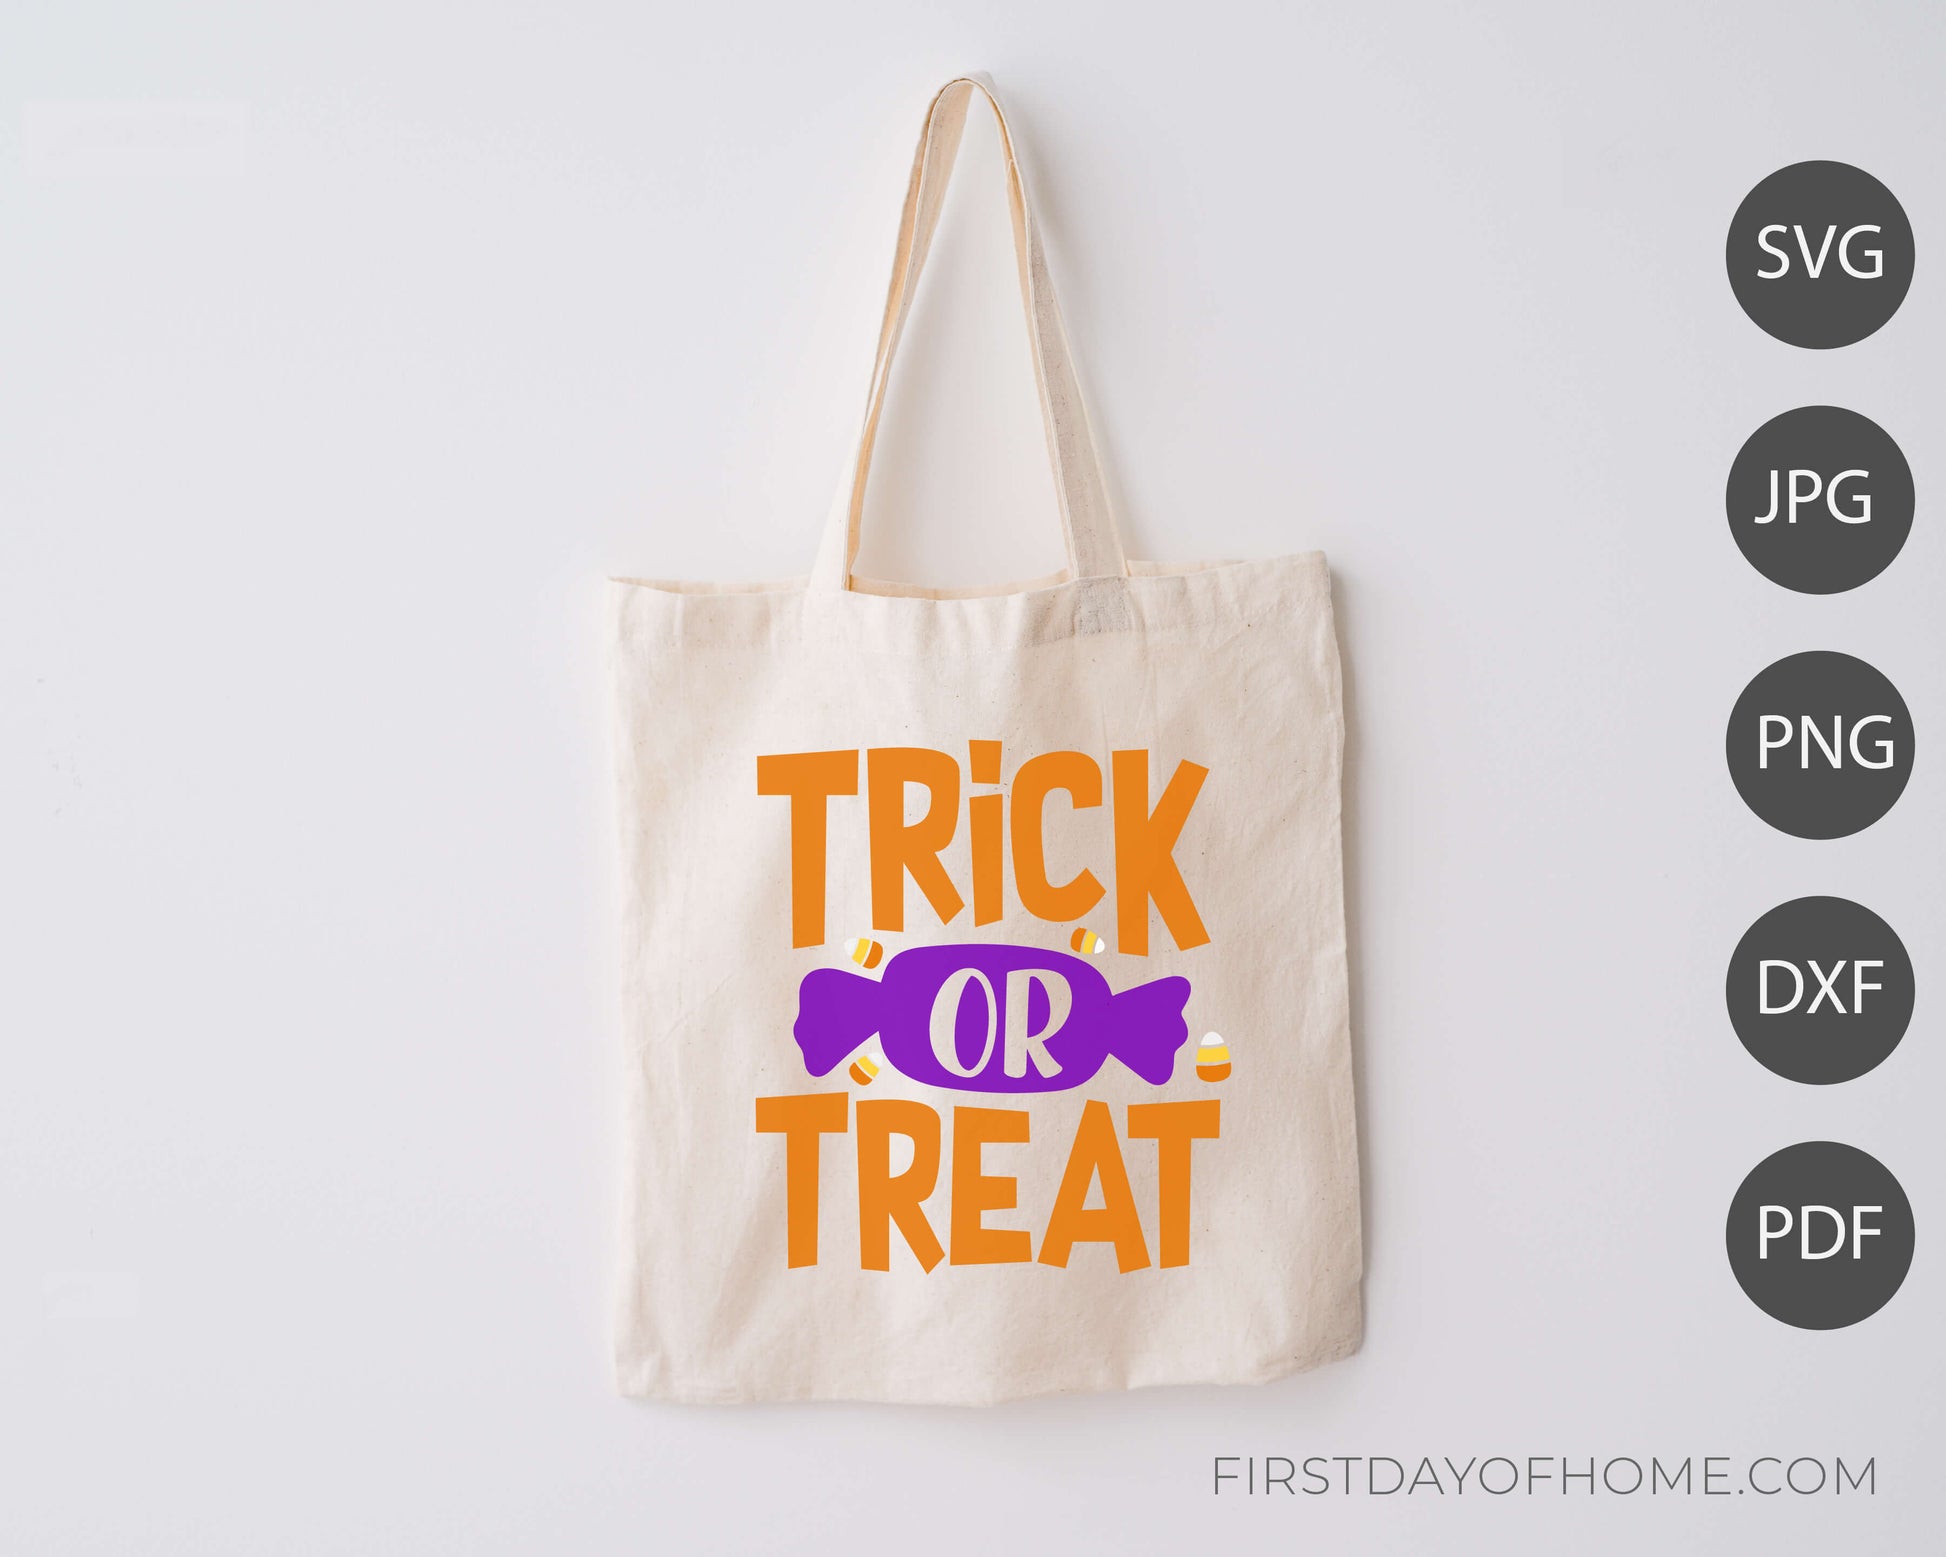 Mockup example of Trick or Treat tote bag using digital files. Lists digital files as SVG, JPG, PNG, DXF and PDF